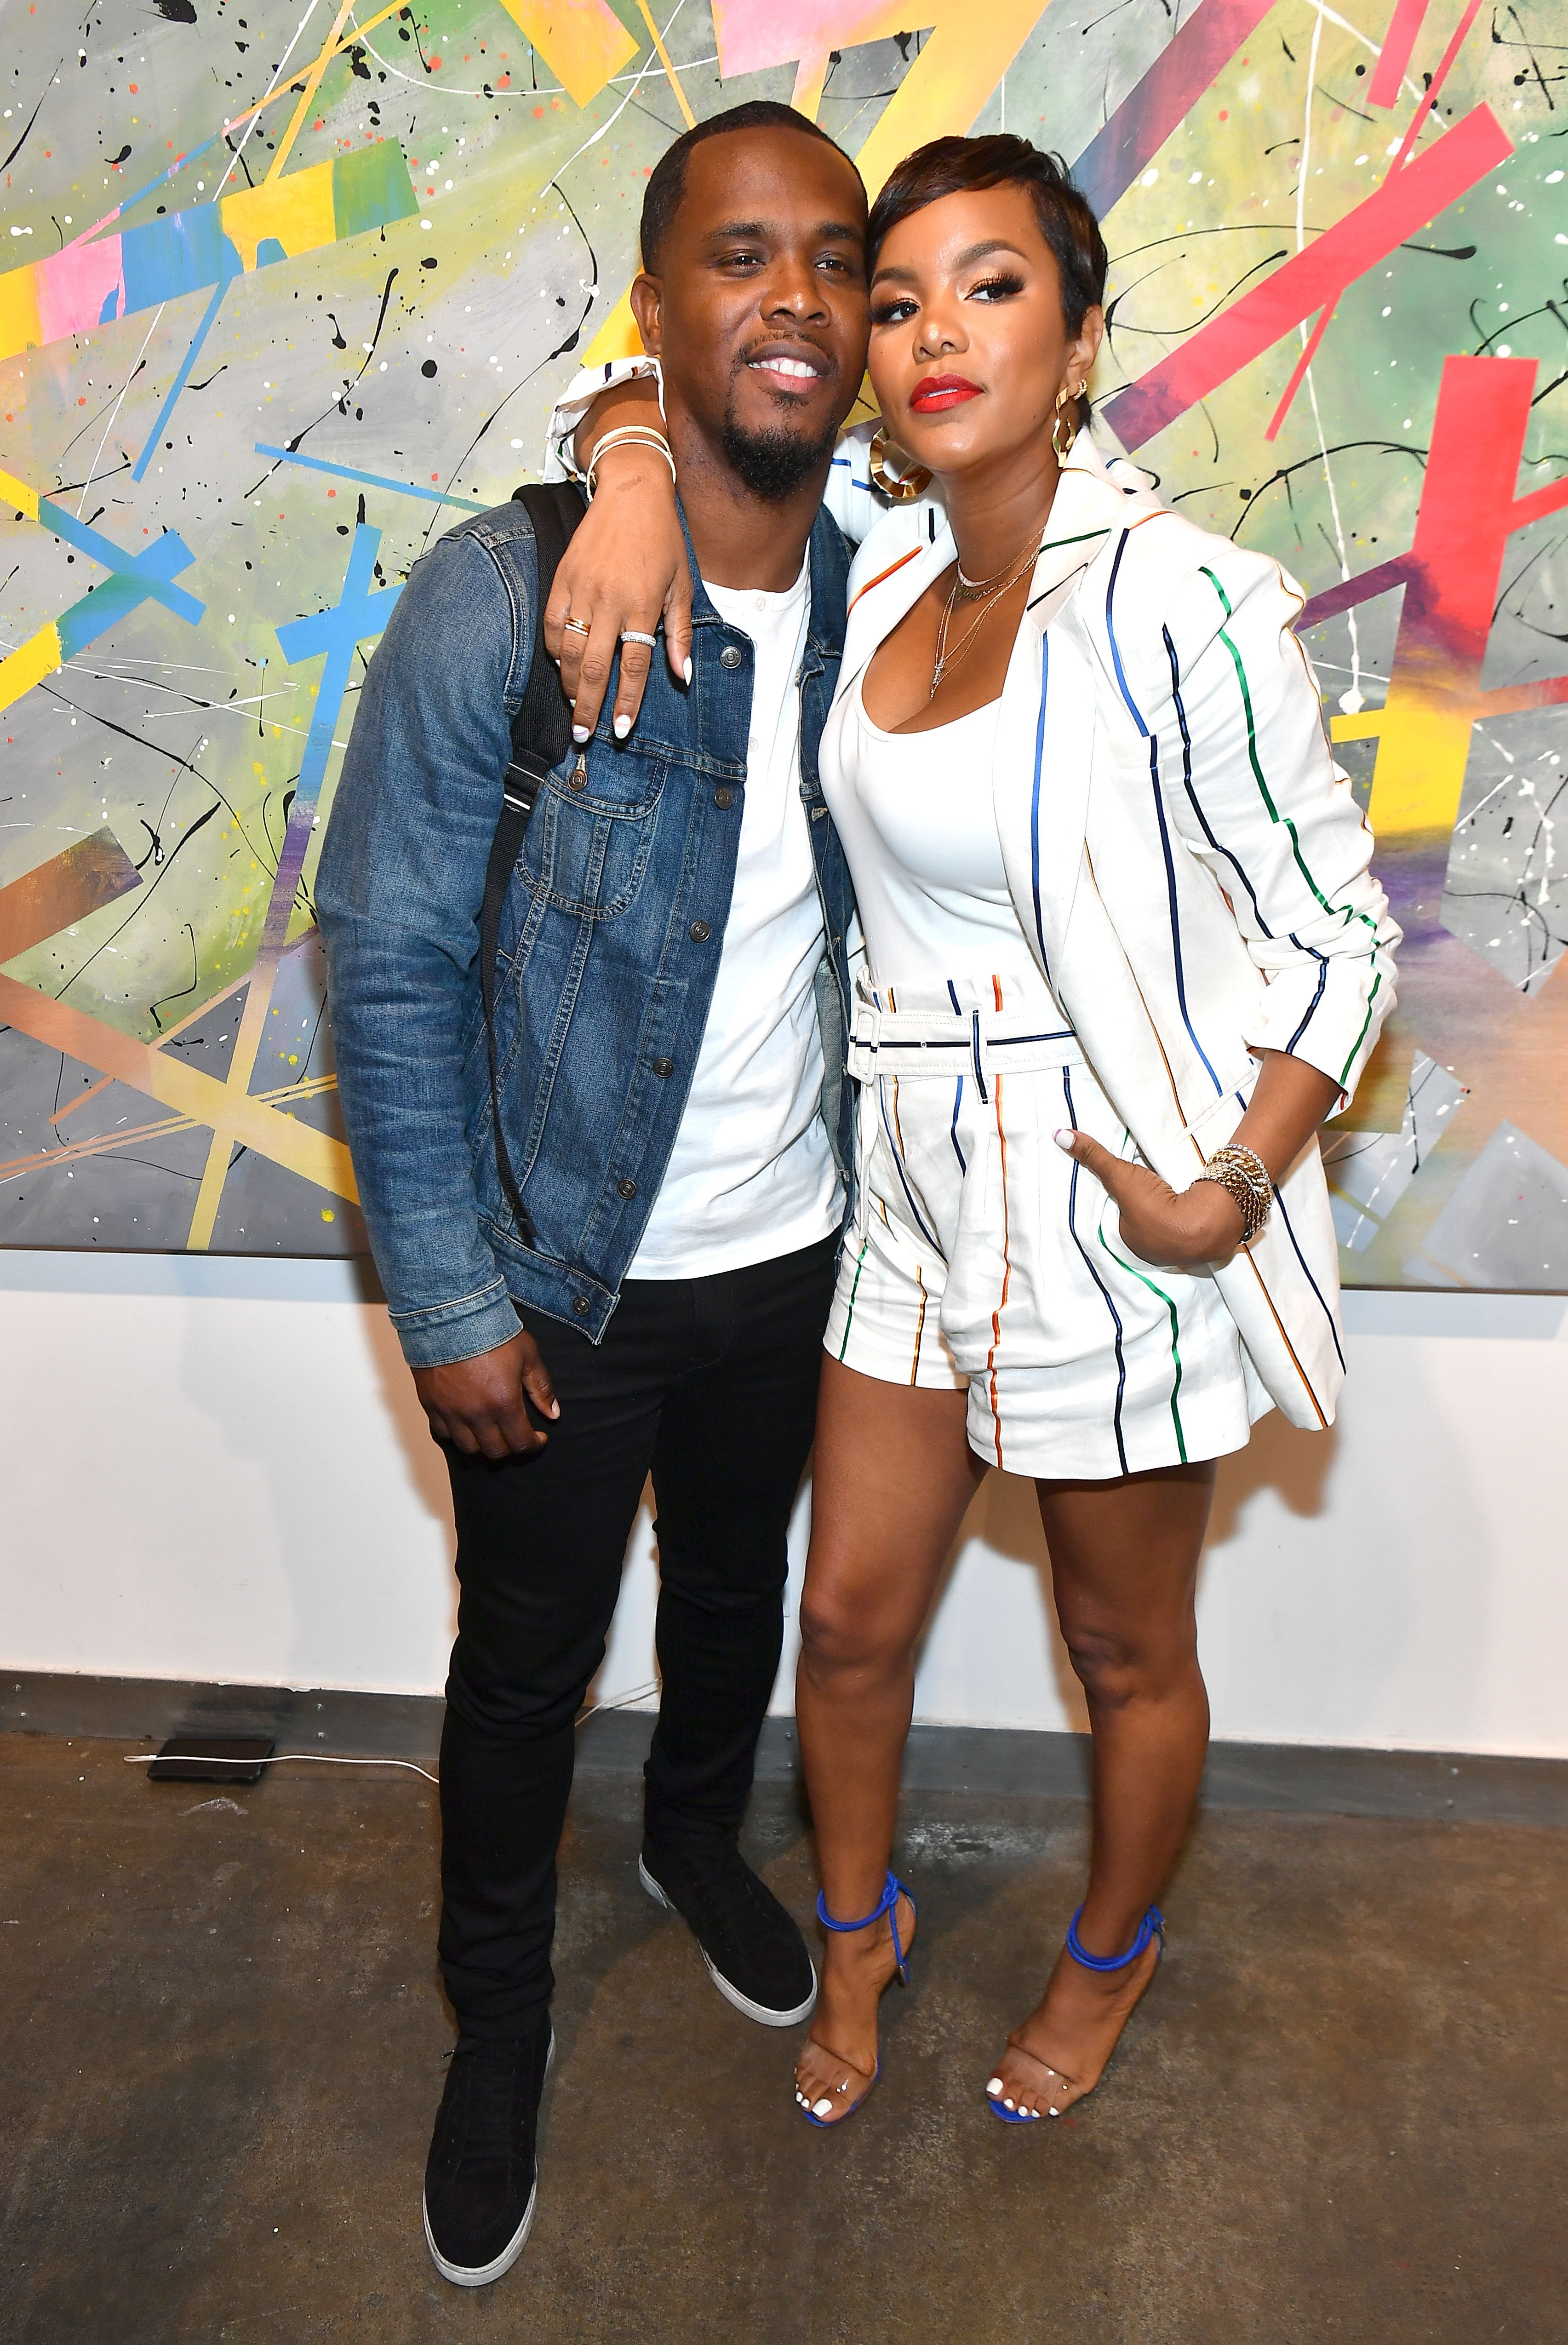 Tommicus Walker and LeToya Luckett Walker during the 2019 Black Love Summit at Mason Fine Art Gallery on July 20, 2019. | Source: Getty Images